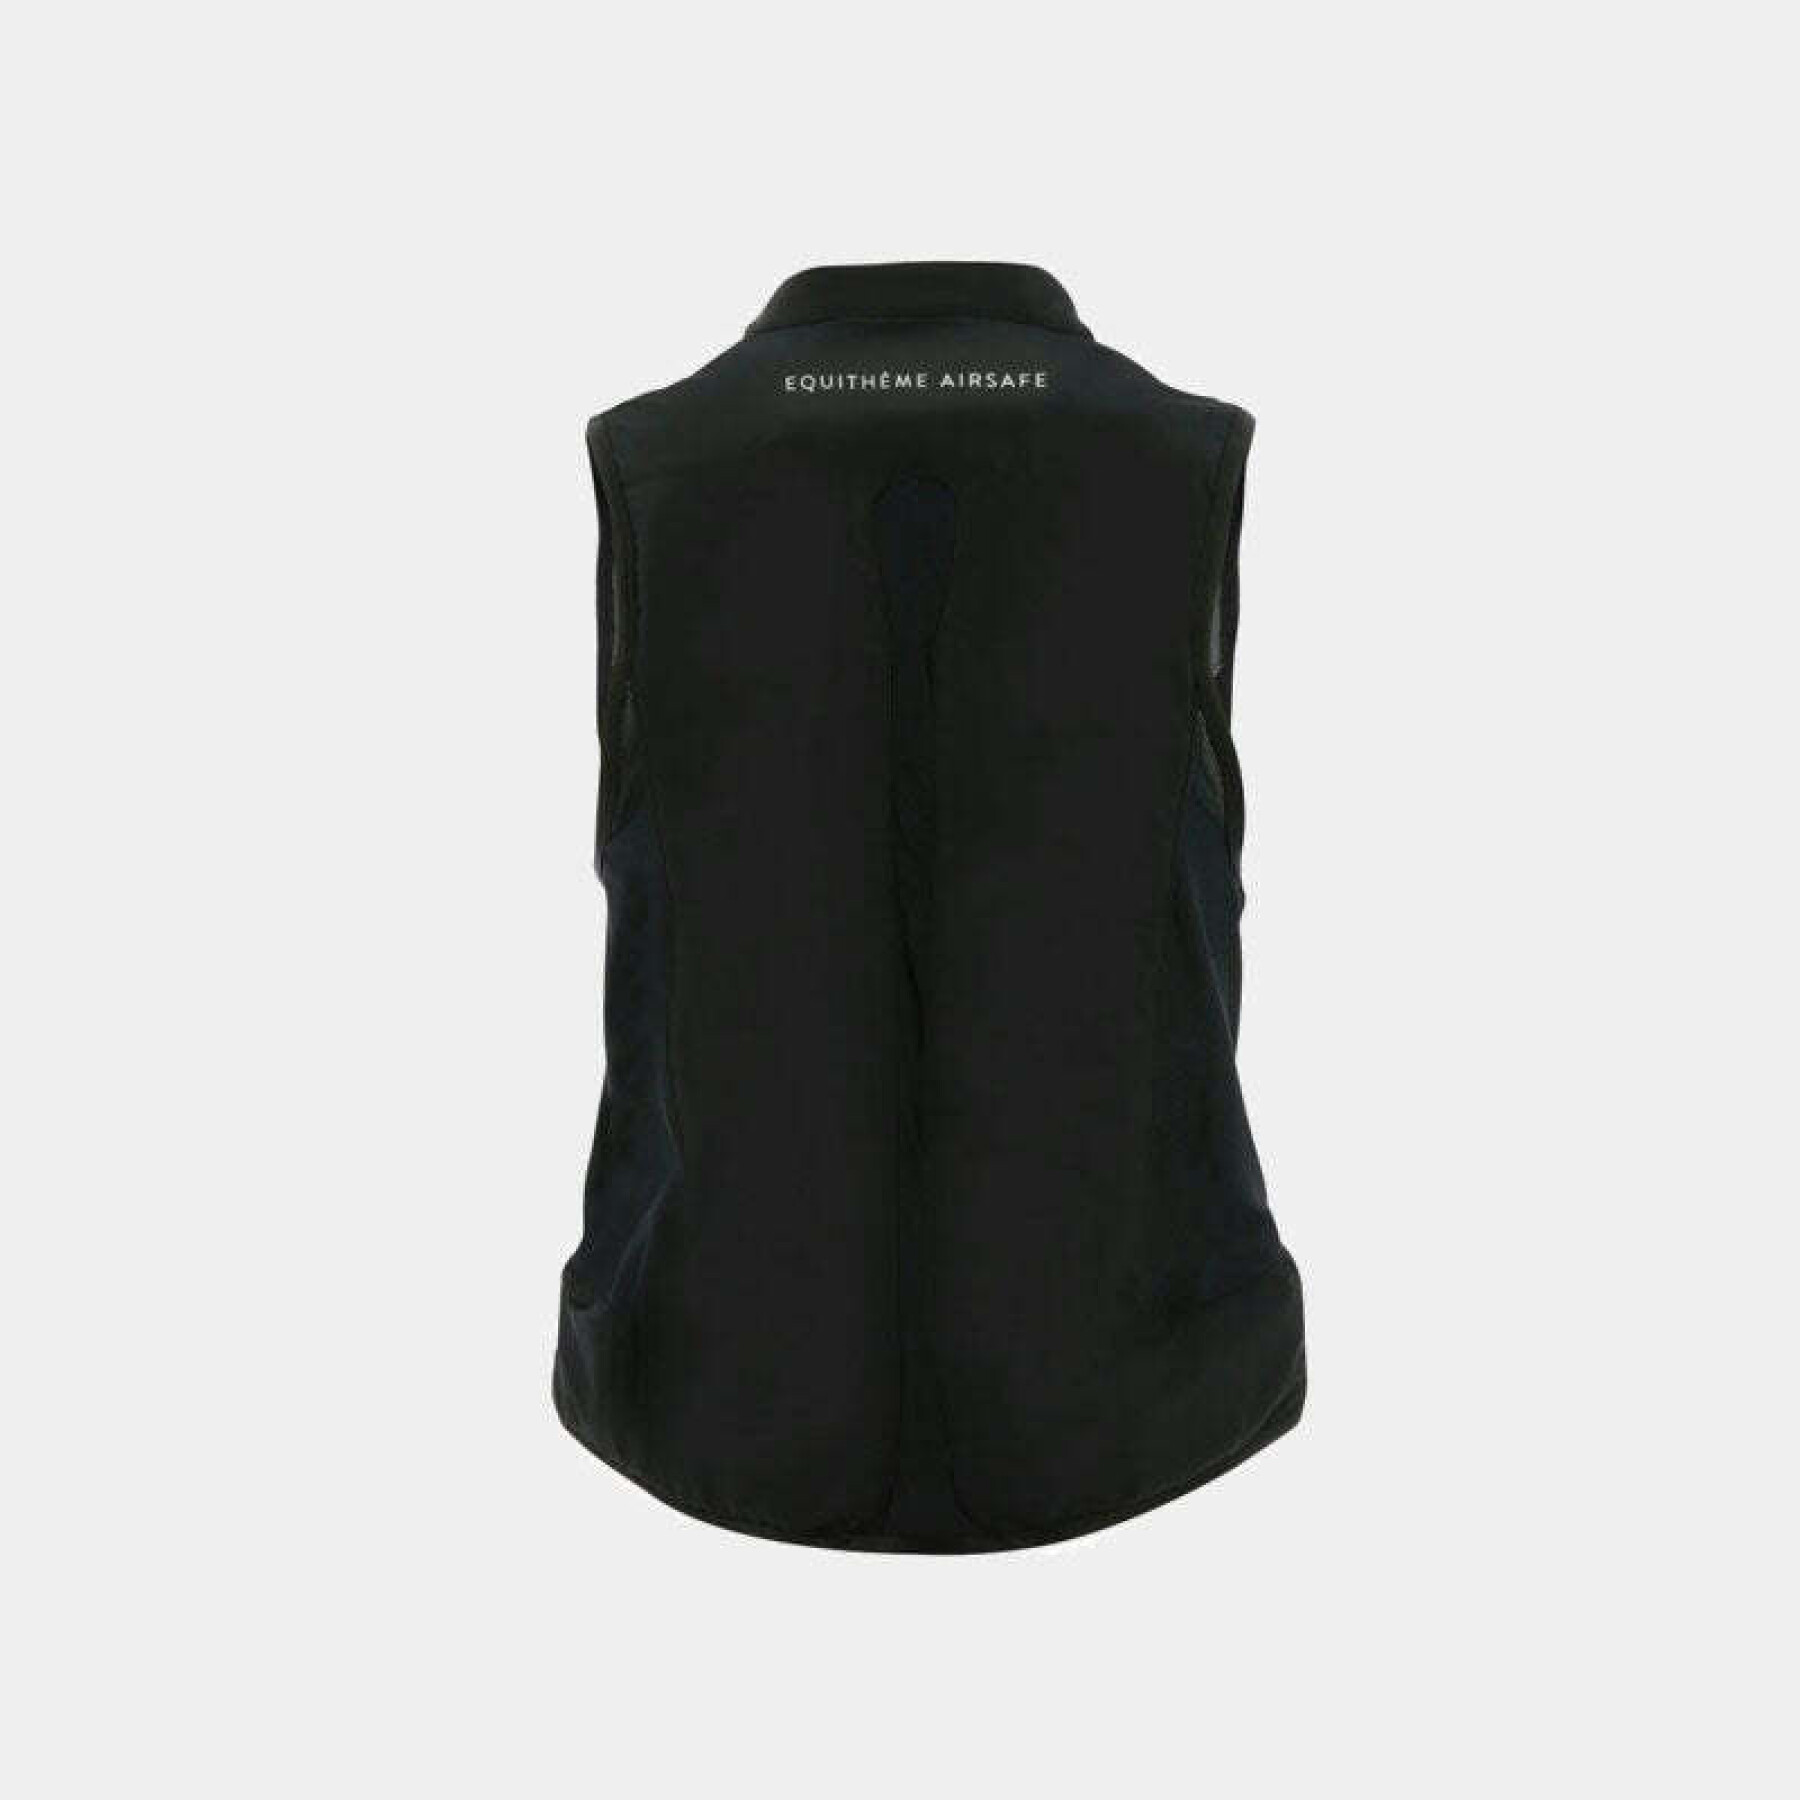 Riding airbag vest Equithème Airsafe